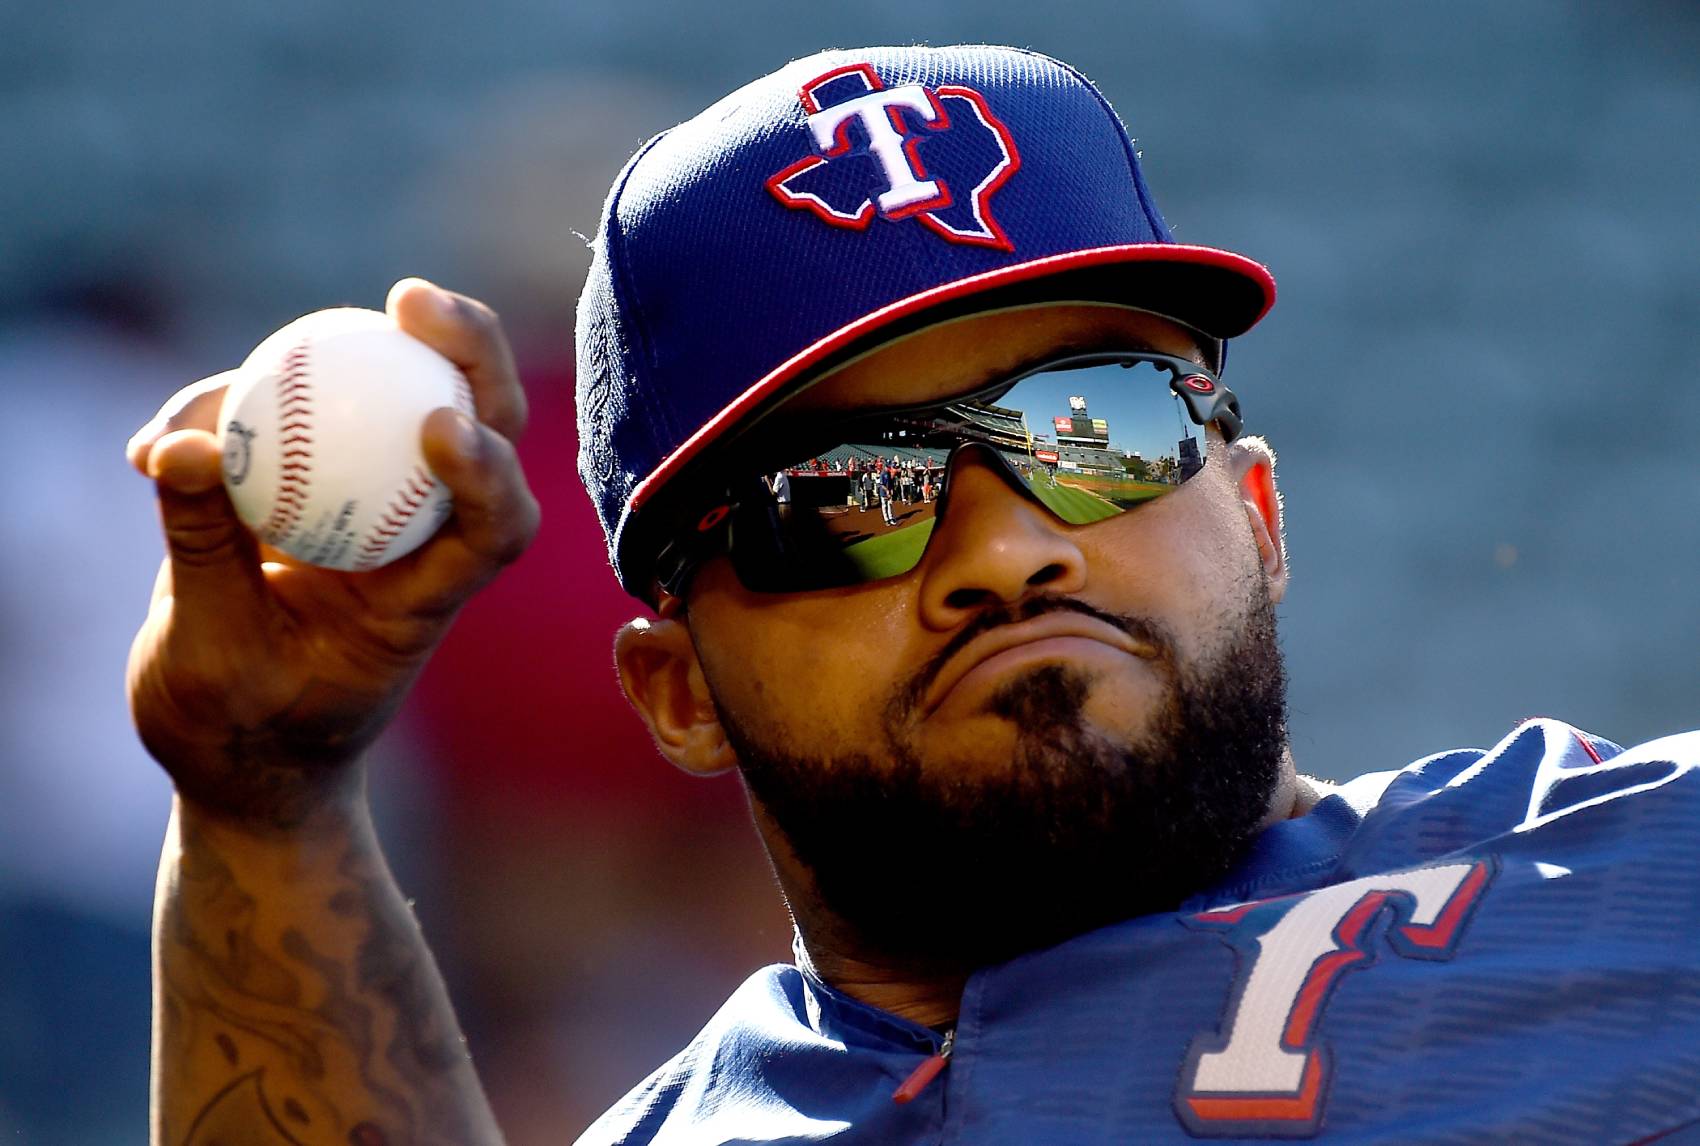 Former Texas Rangers first baseman Prince Fielder could earn MLB's biggest paycheck in 2020. One problem: He hasn't played since 2016.